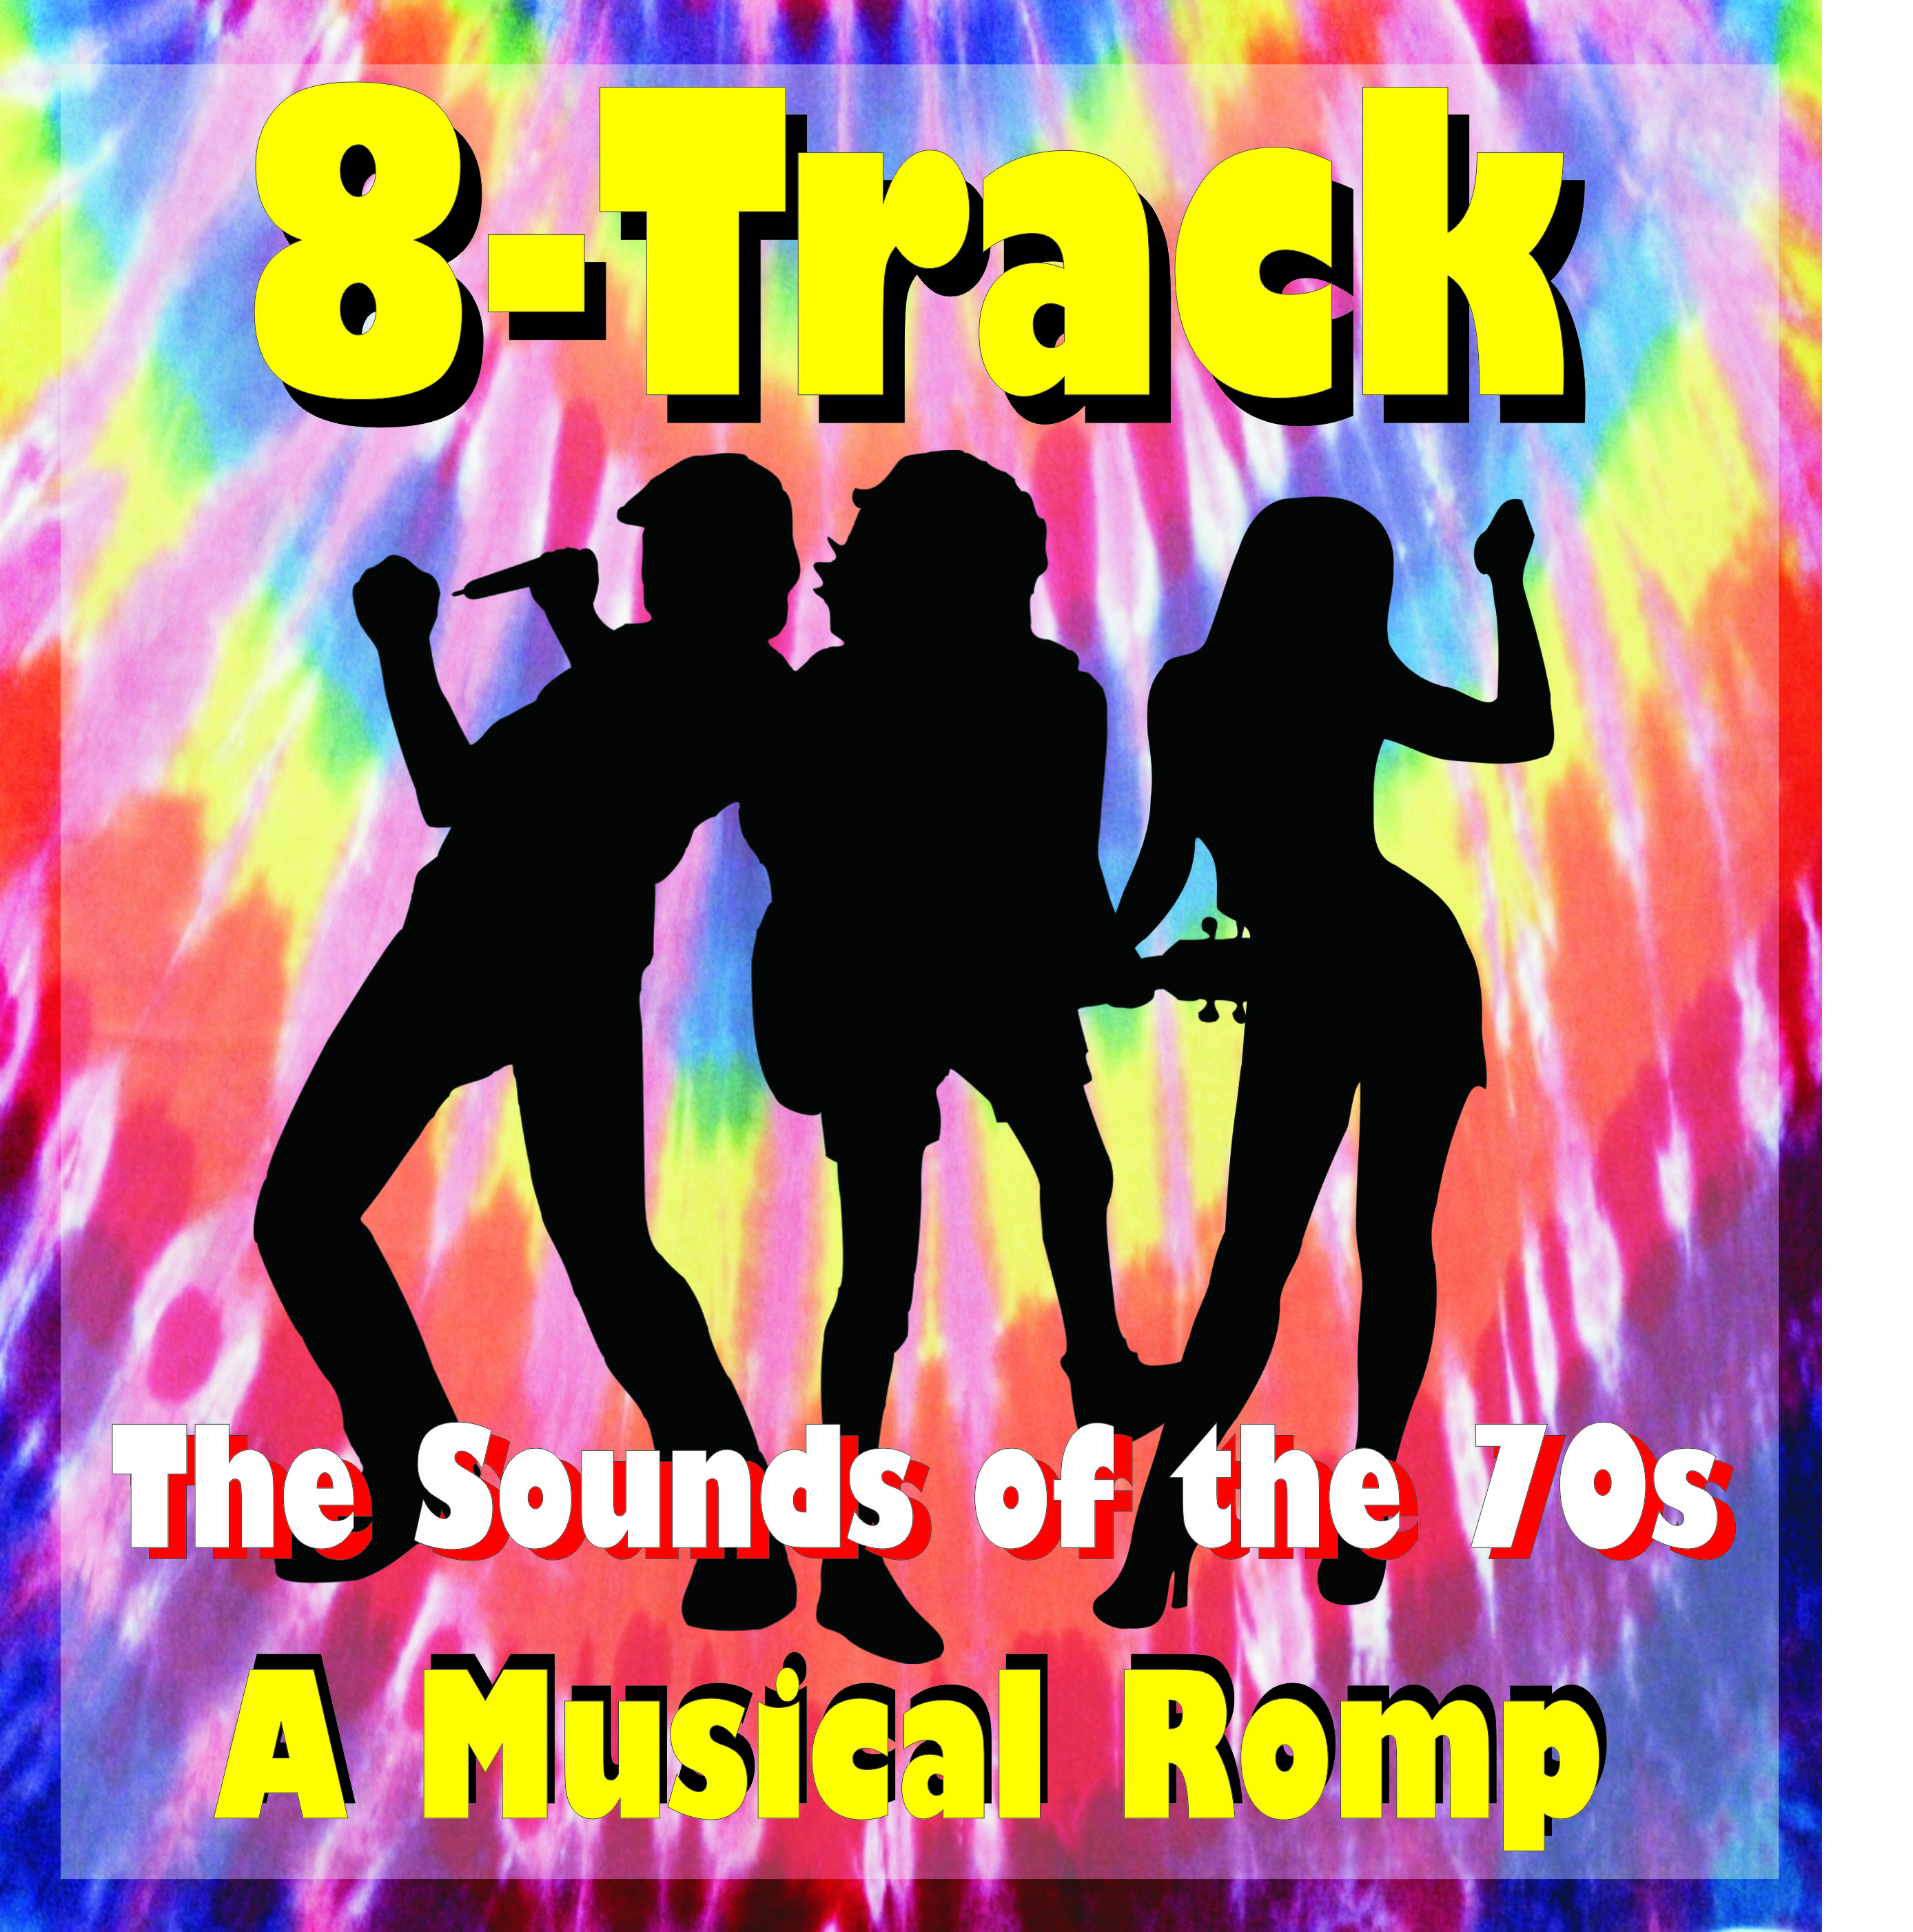 8 Track: The Sounds of the 70s